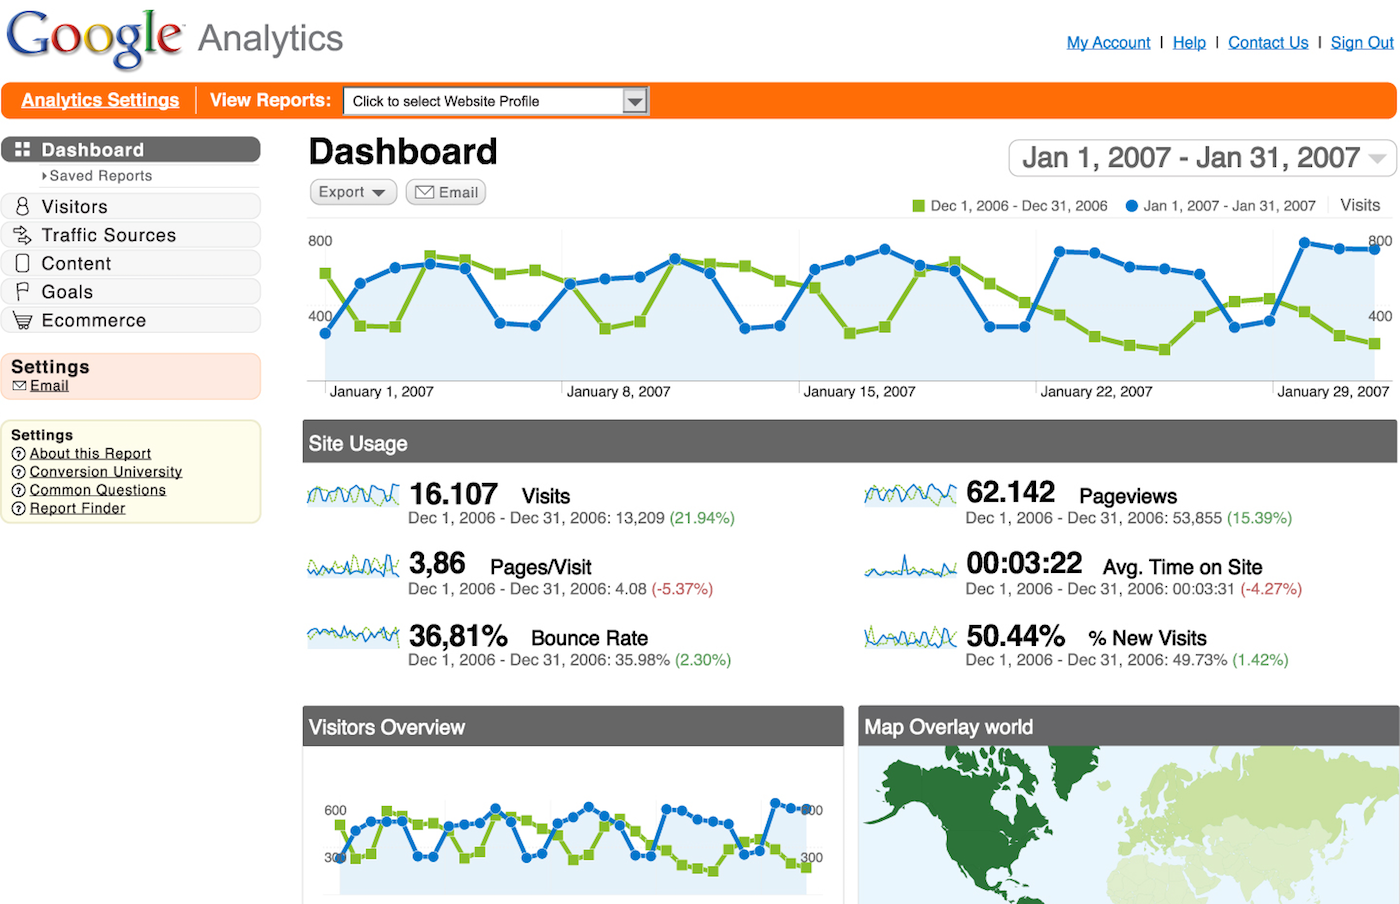 Google Analytics for Hotels, b&b, Vacation Rentals, Villas and Multi Property